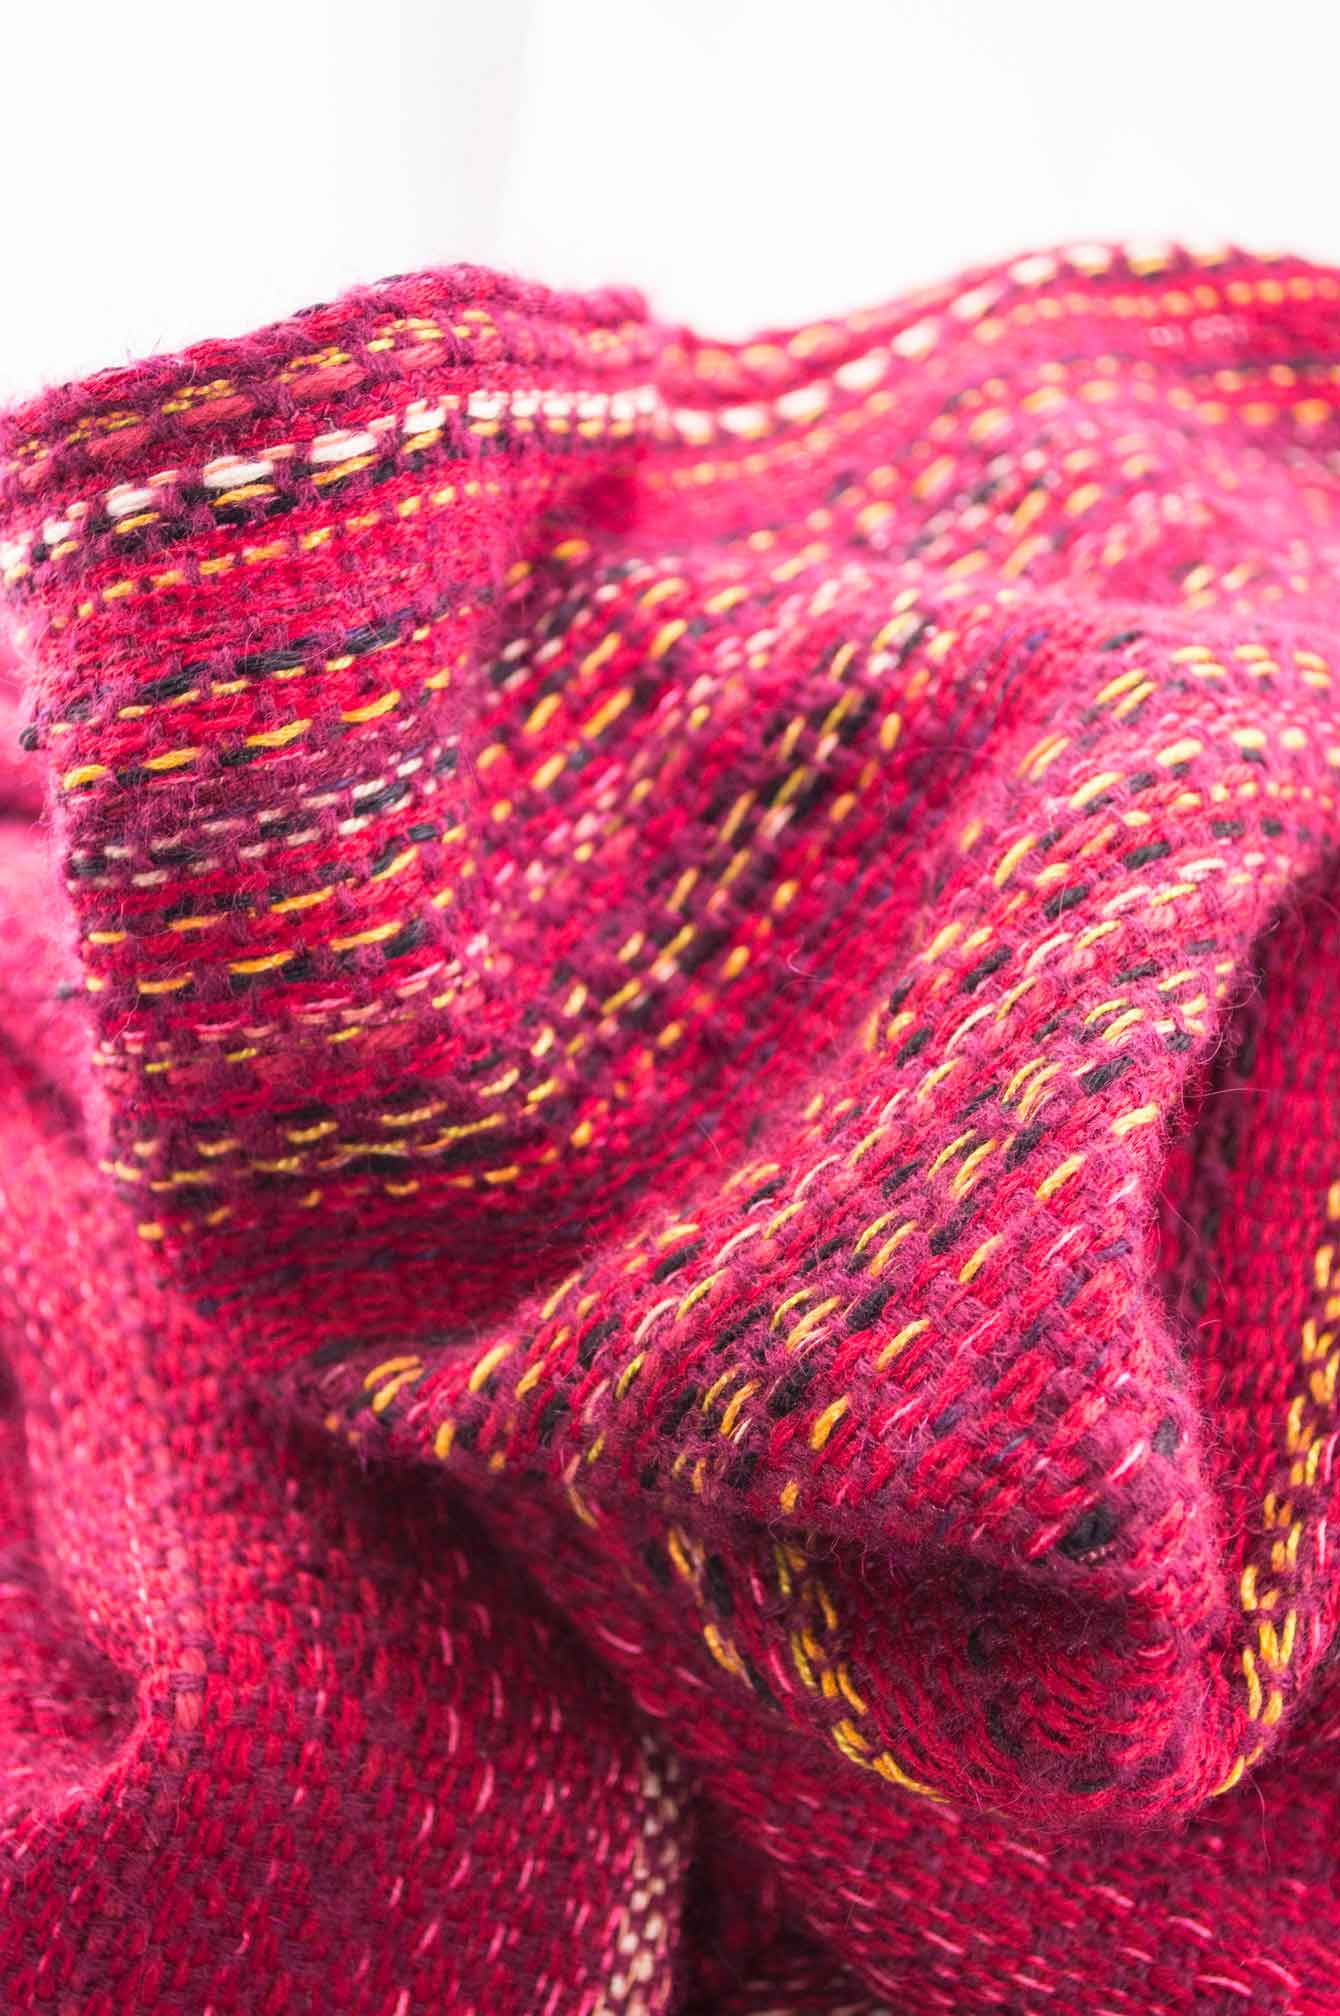 Throw blanket created with violet mohair, cashmere, wool, cotton, and linen.   Technique: Throw blanket hand-woven in a traditional way on non-mechanical looms in the 7th arrondissement of Paris in France.  Finishes: Right edge. Double stitching. 2 edges with 9 cm wool fringes.  Size: 150 x 235 cm.  Single piece / 1 copy only.